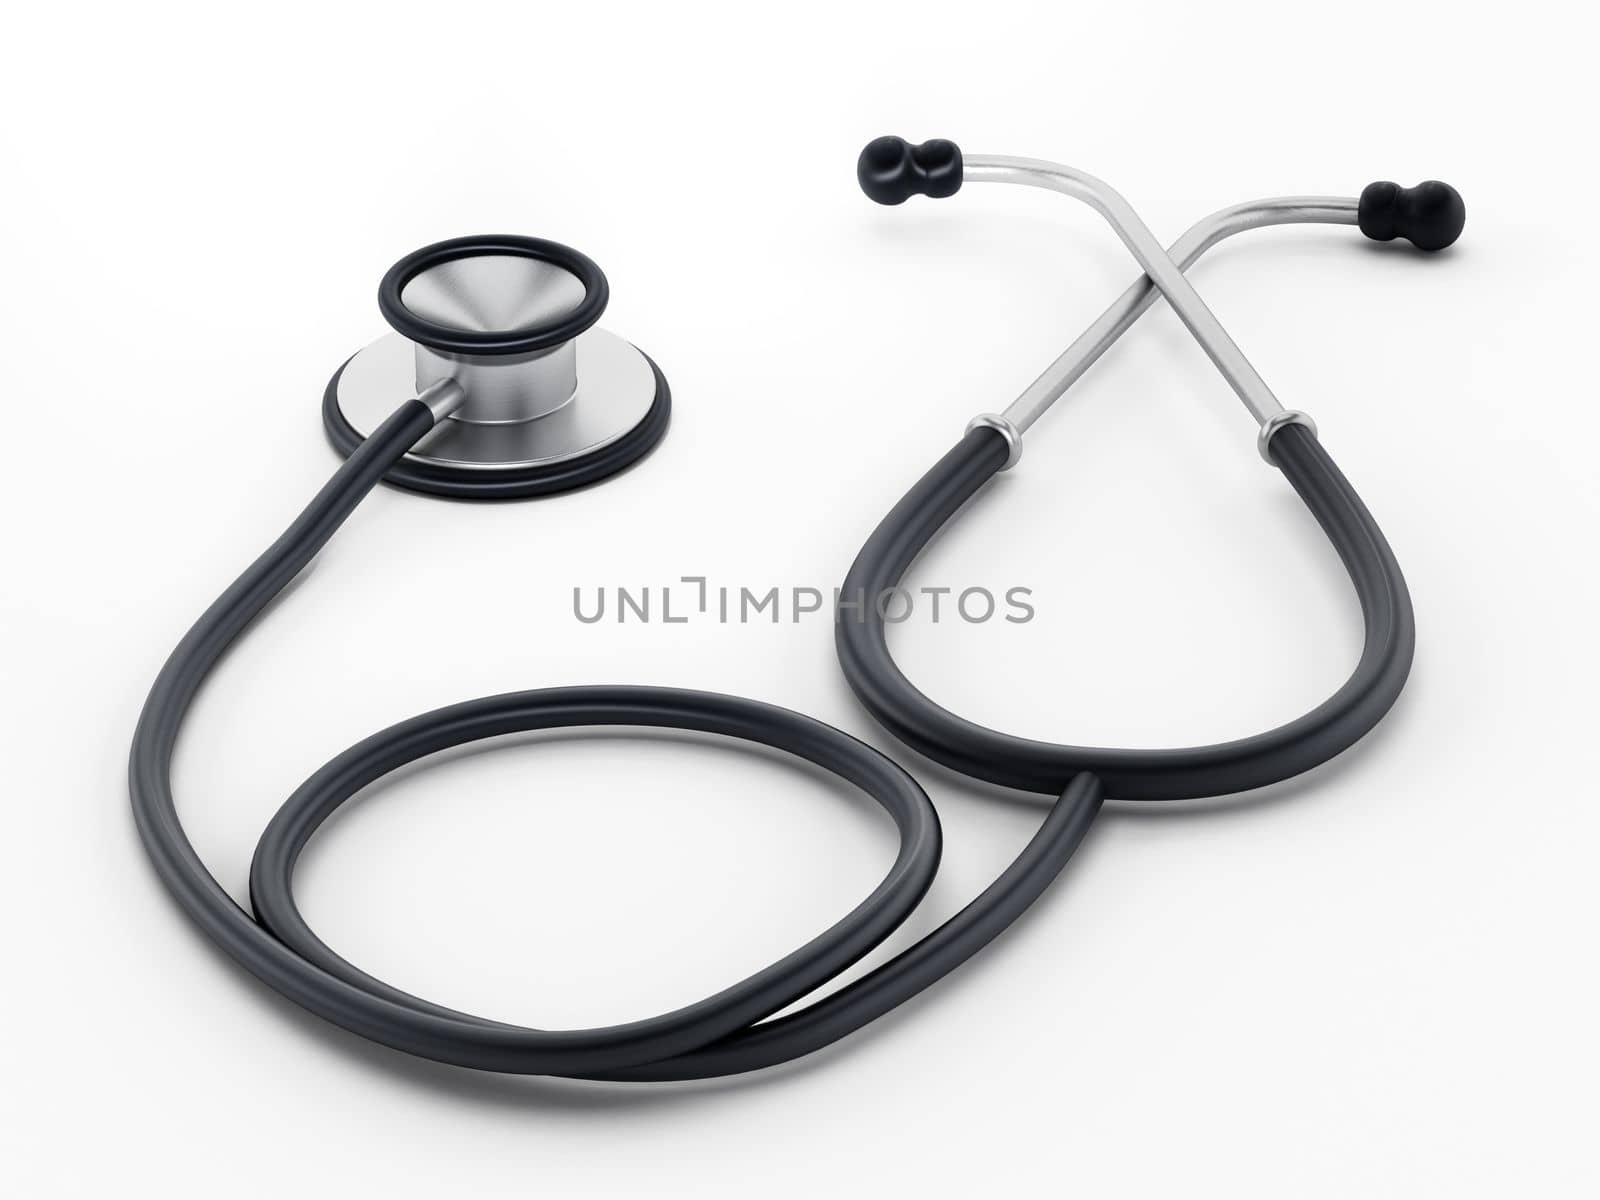 Stethoscope standing on white surface. 3D illustration by Simsek